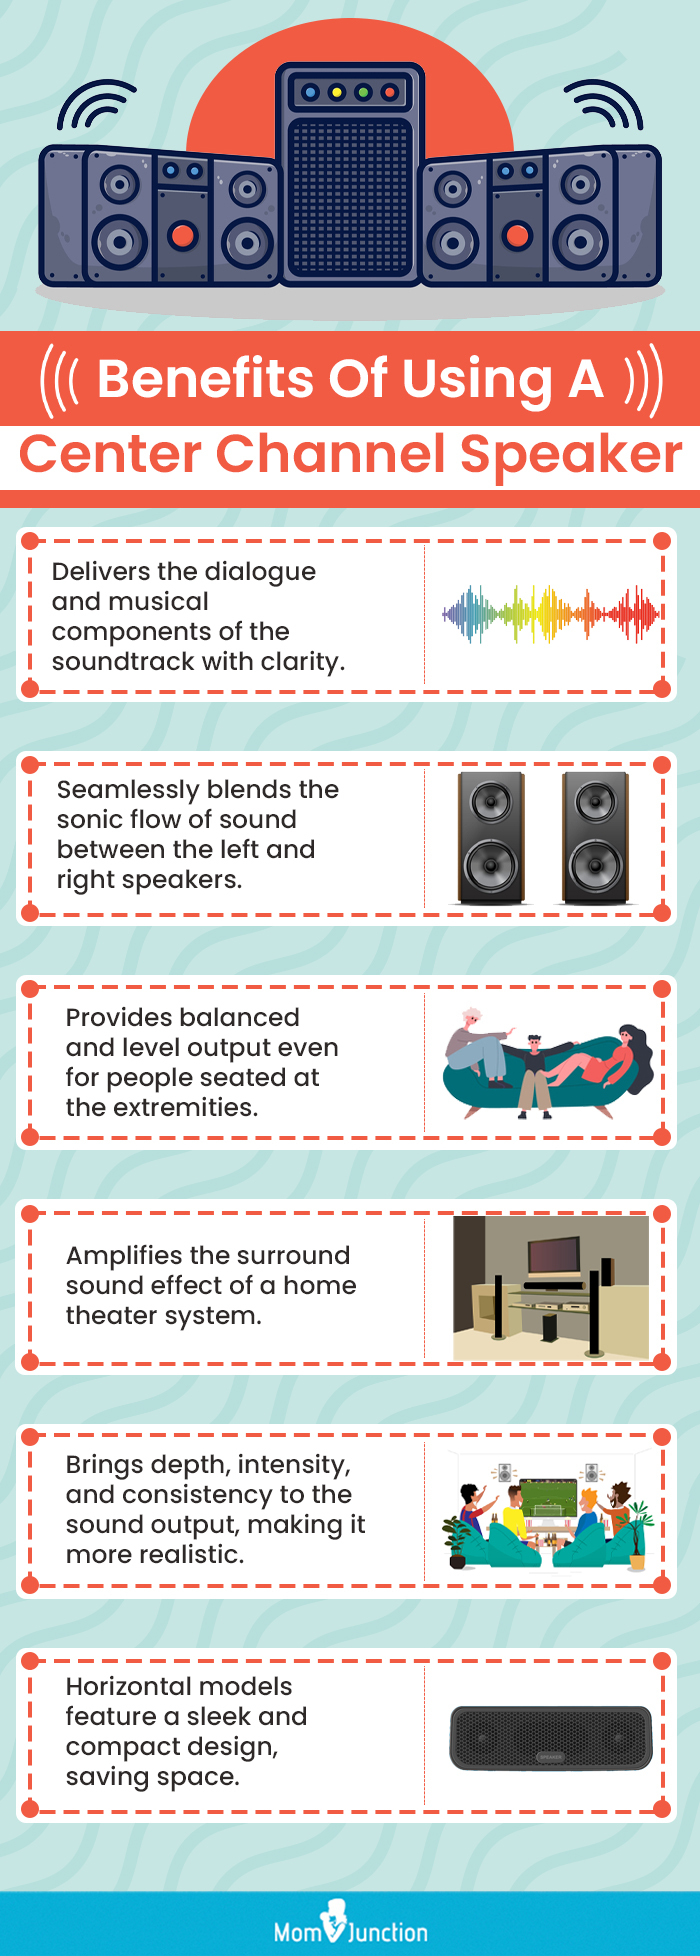 Benefits Of Using A Center Channel Speaker (infographic)